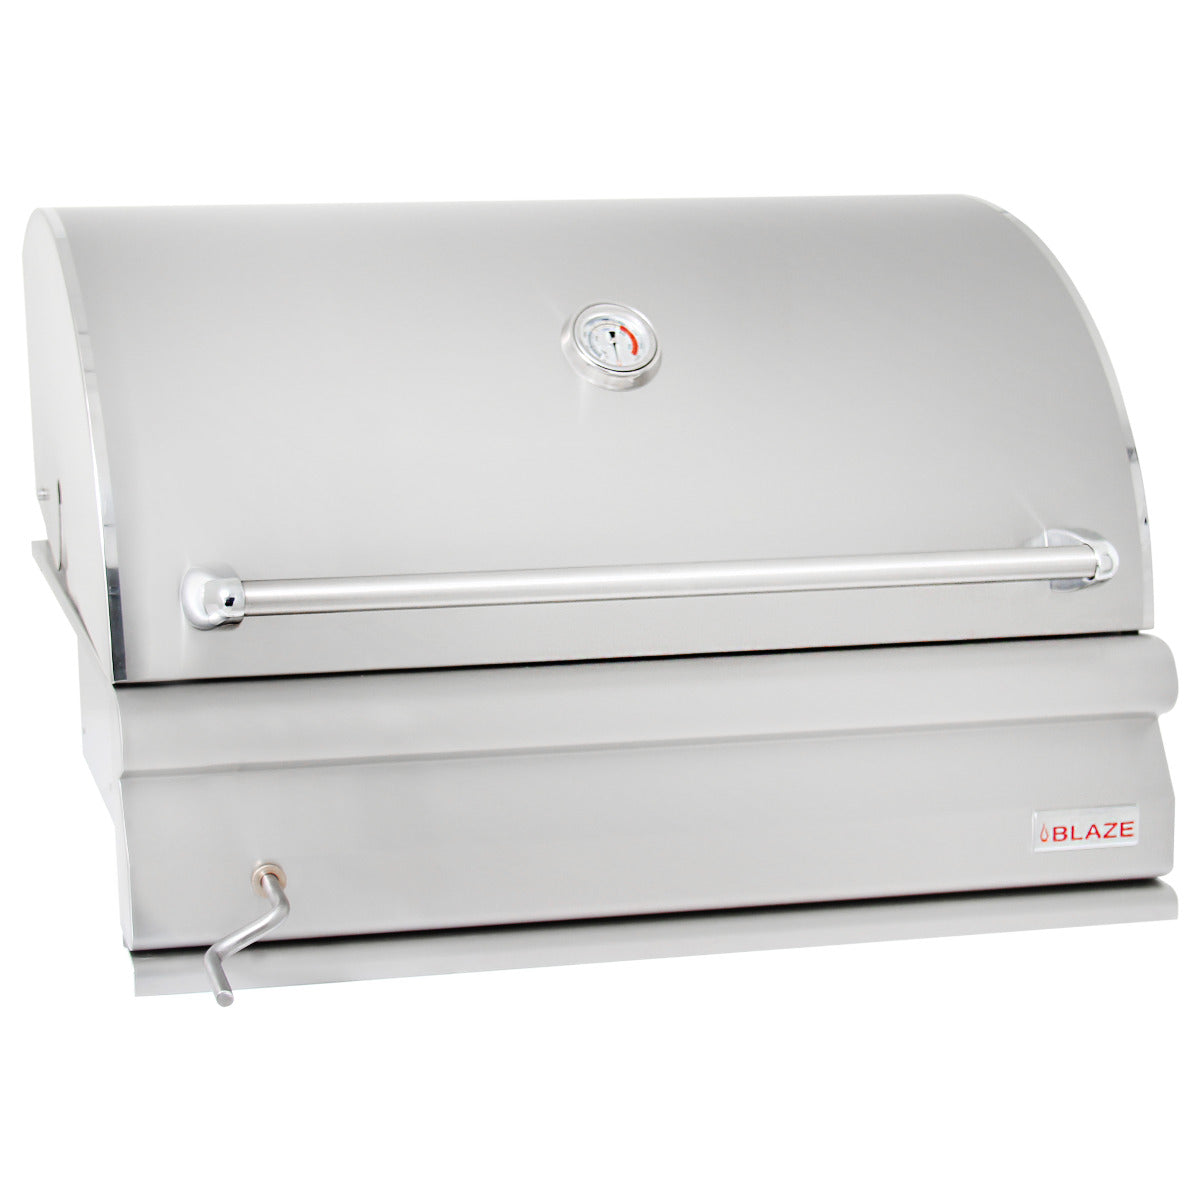 Blaze 32 Inch Charcoal Grill